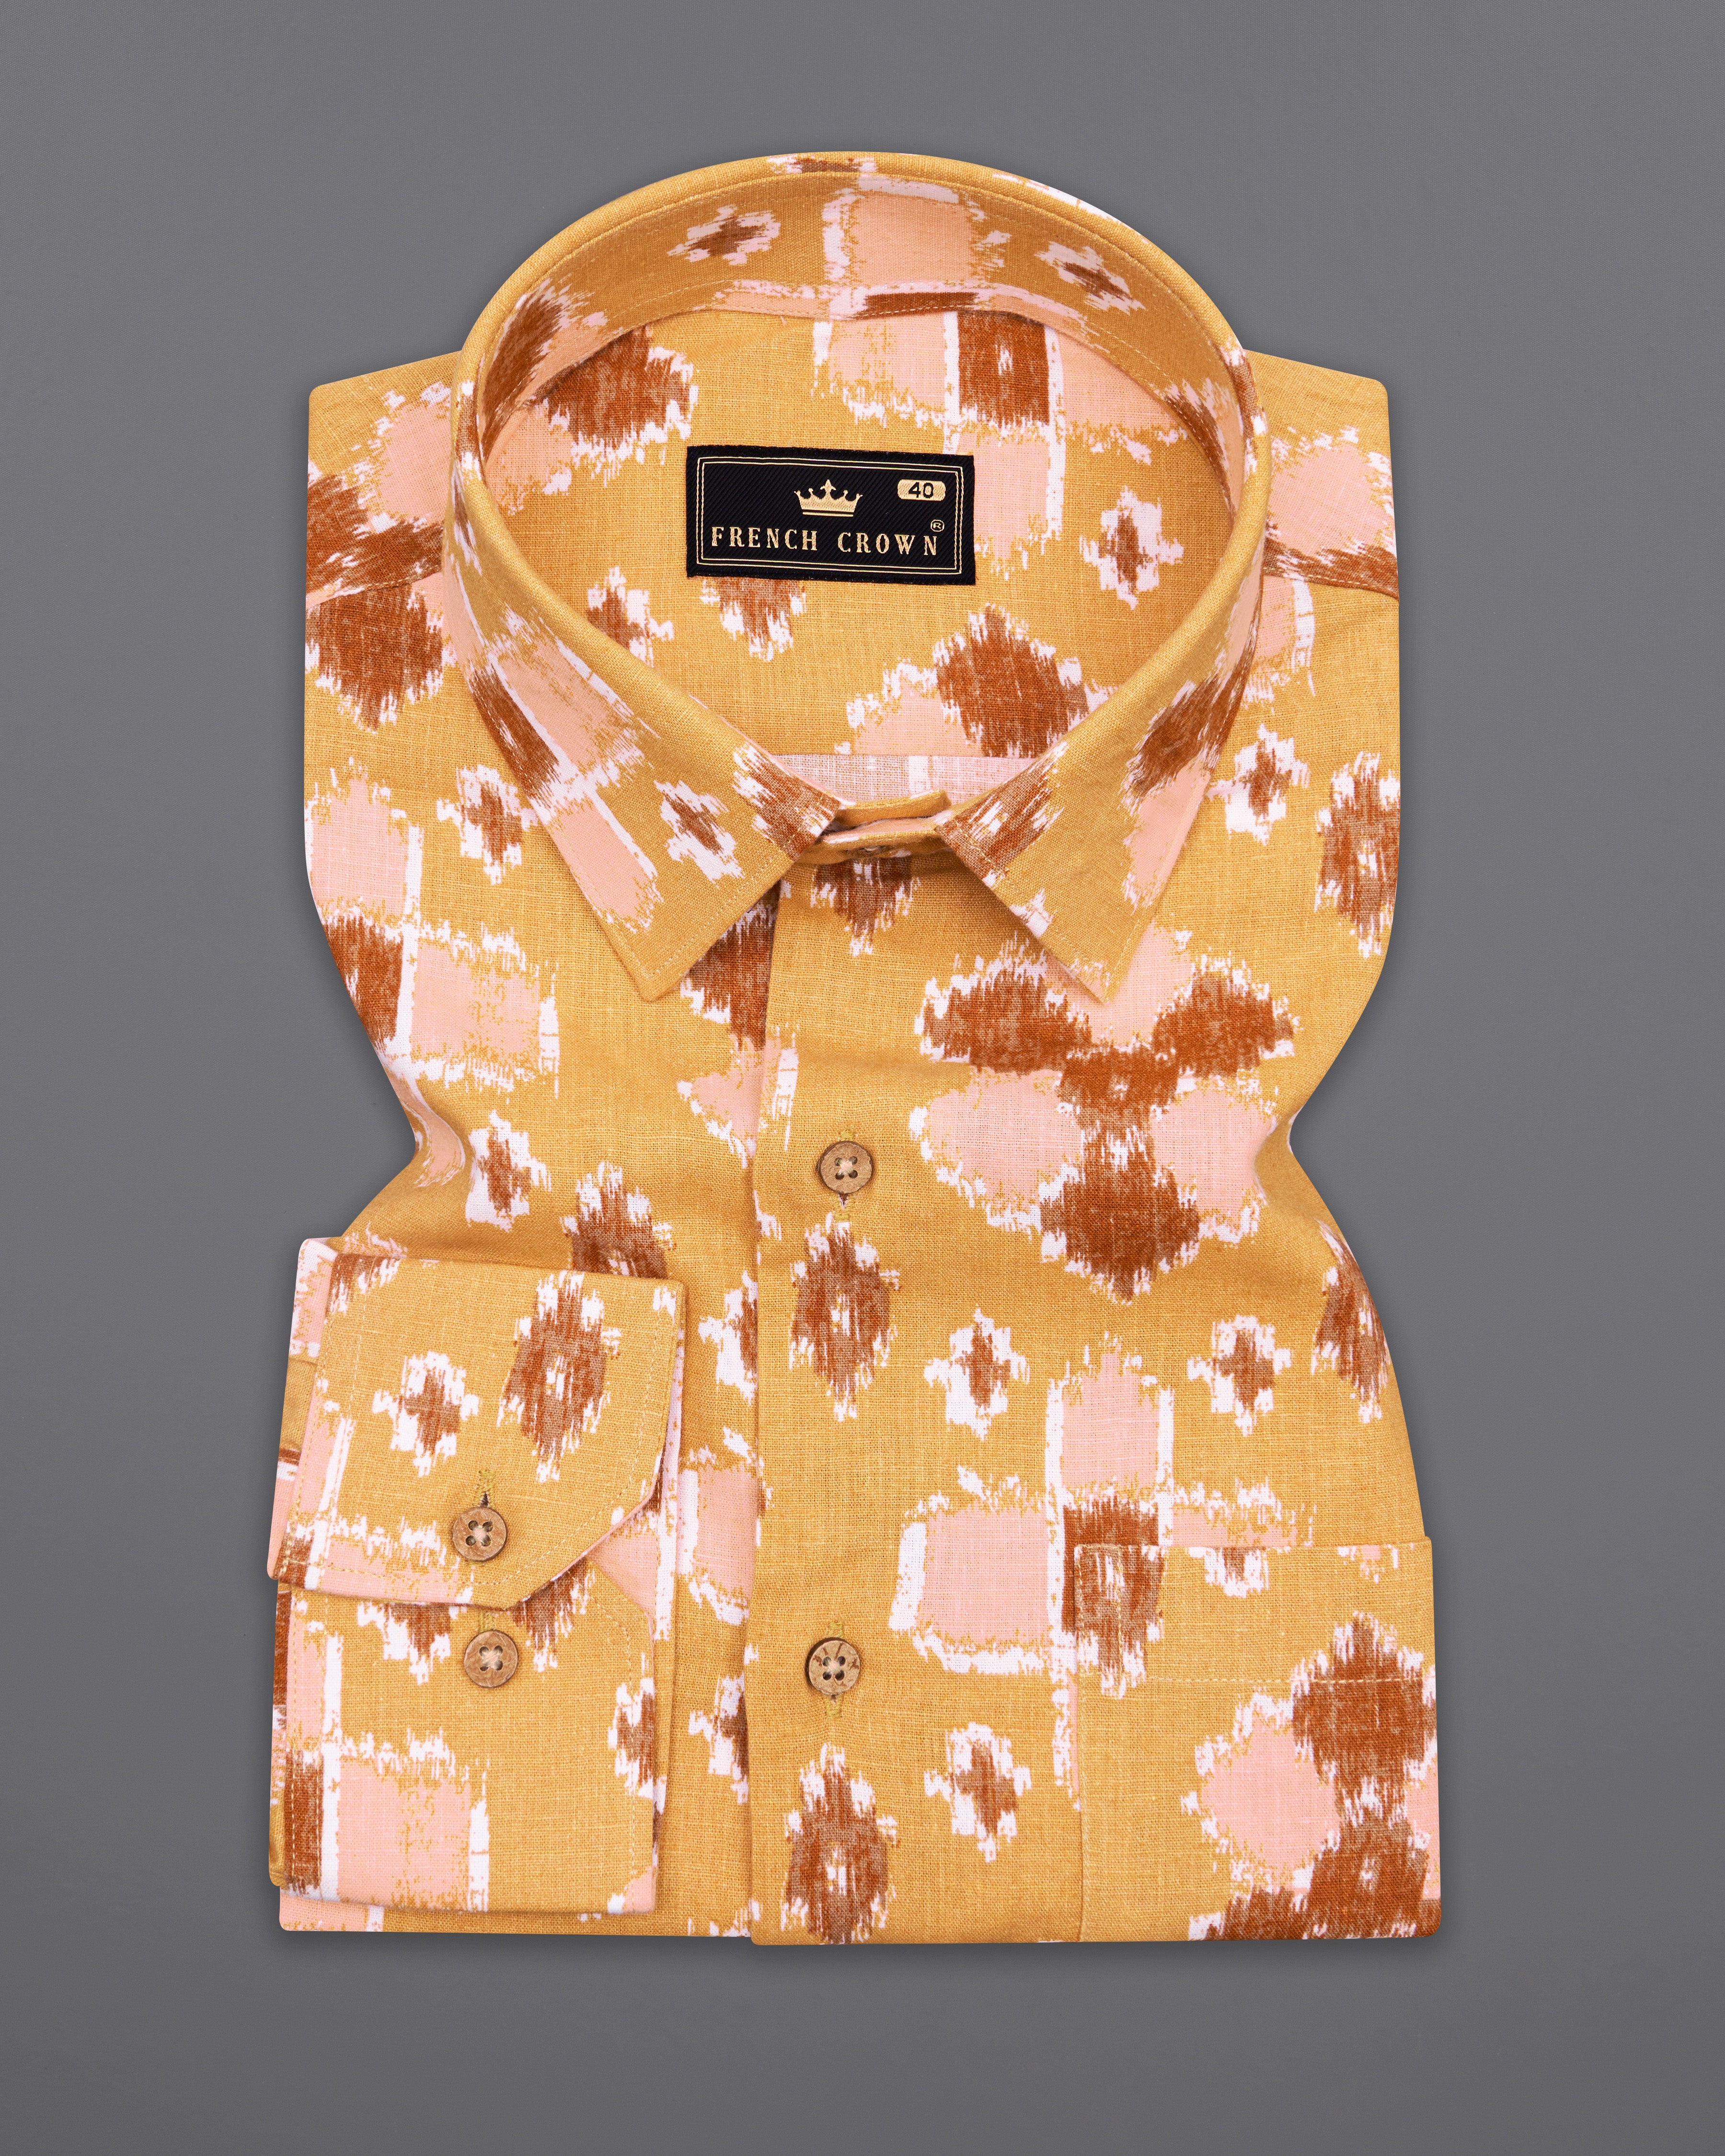 Anzac Brown Multicolour Ikat Textured Chambray Shirt 9998-CB-38, 9998-CB-H-38, 9998-CB-39, 9998-CB-H-39, 9998-CB-40, 9998-CB-H-40, 9998-CB-42, 9998-CB-H-42, 9998-CB-44, 9998-CB-H-44, 9998-CB-46, 9998-CB-H-46, 9998-CB-48, 9998-CB-H-48, 9998-CB-50, 9998-CB-H-50, 9998-CB-52, 9998-CB-H-52